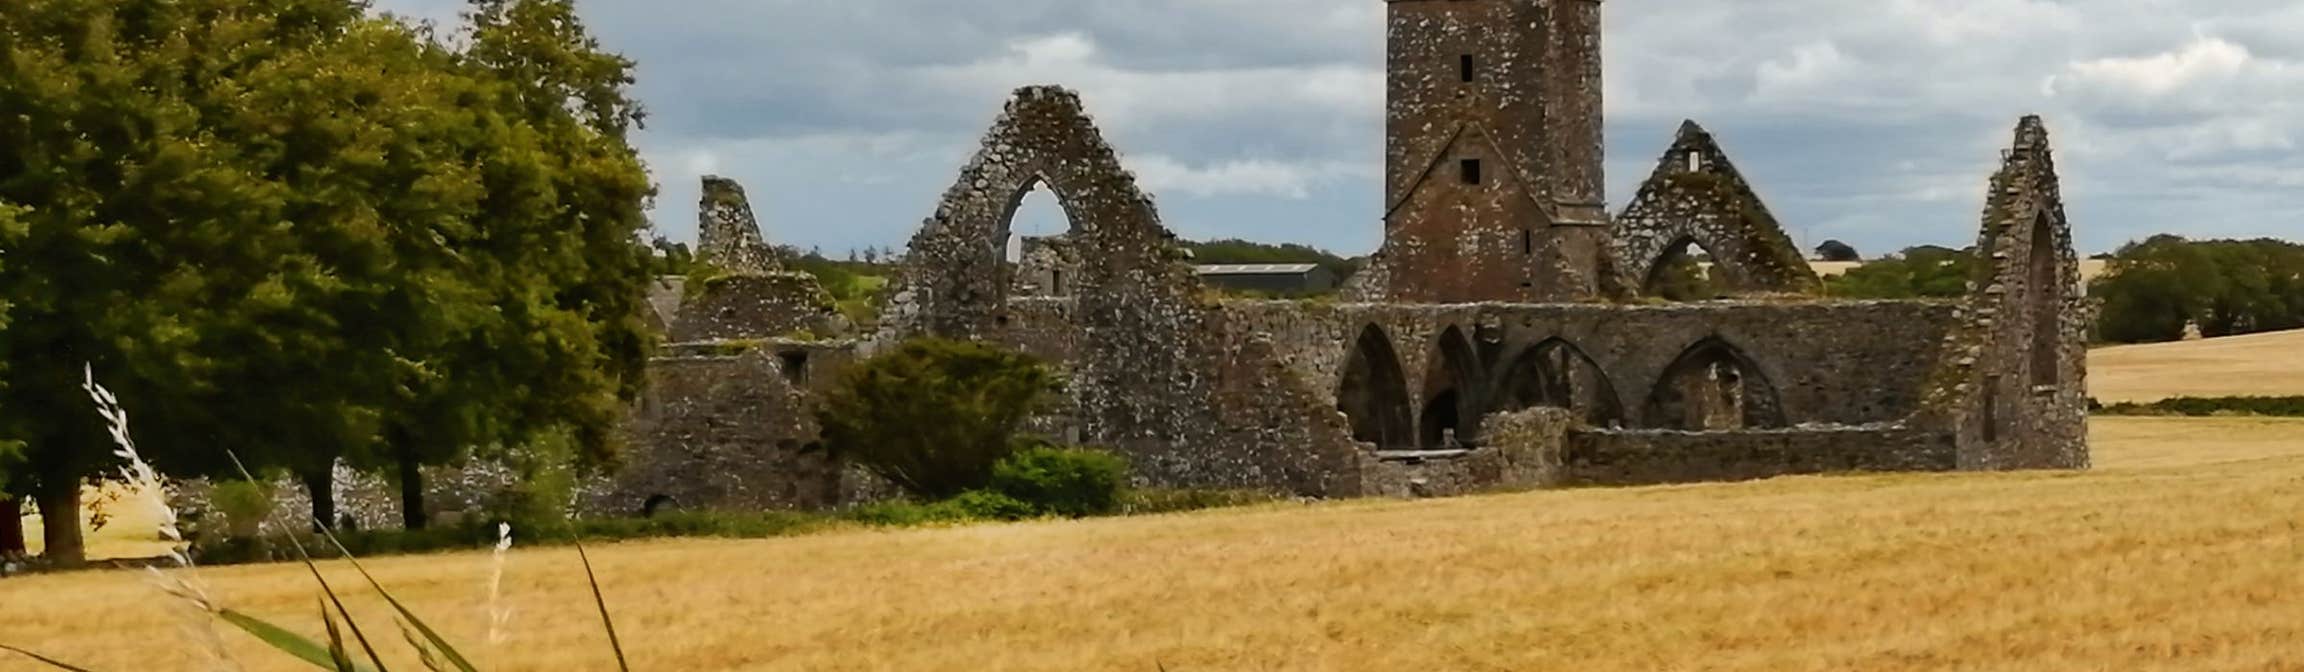 Image of ruins in Ovens in County Cork